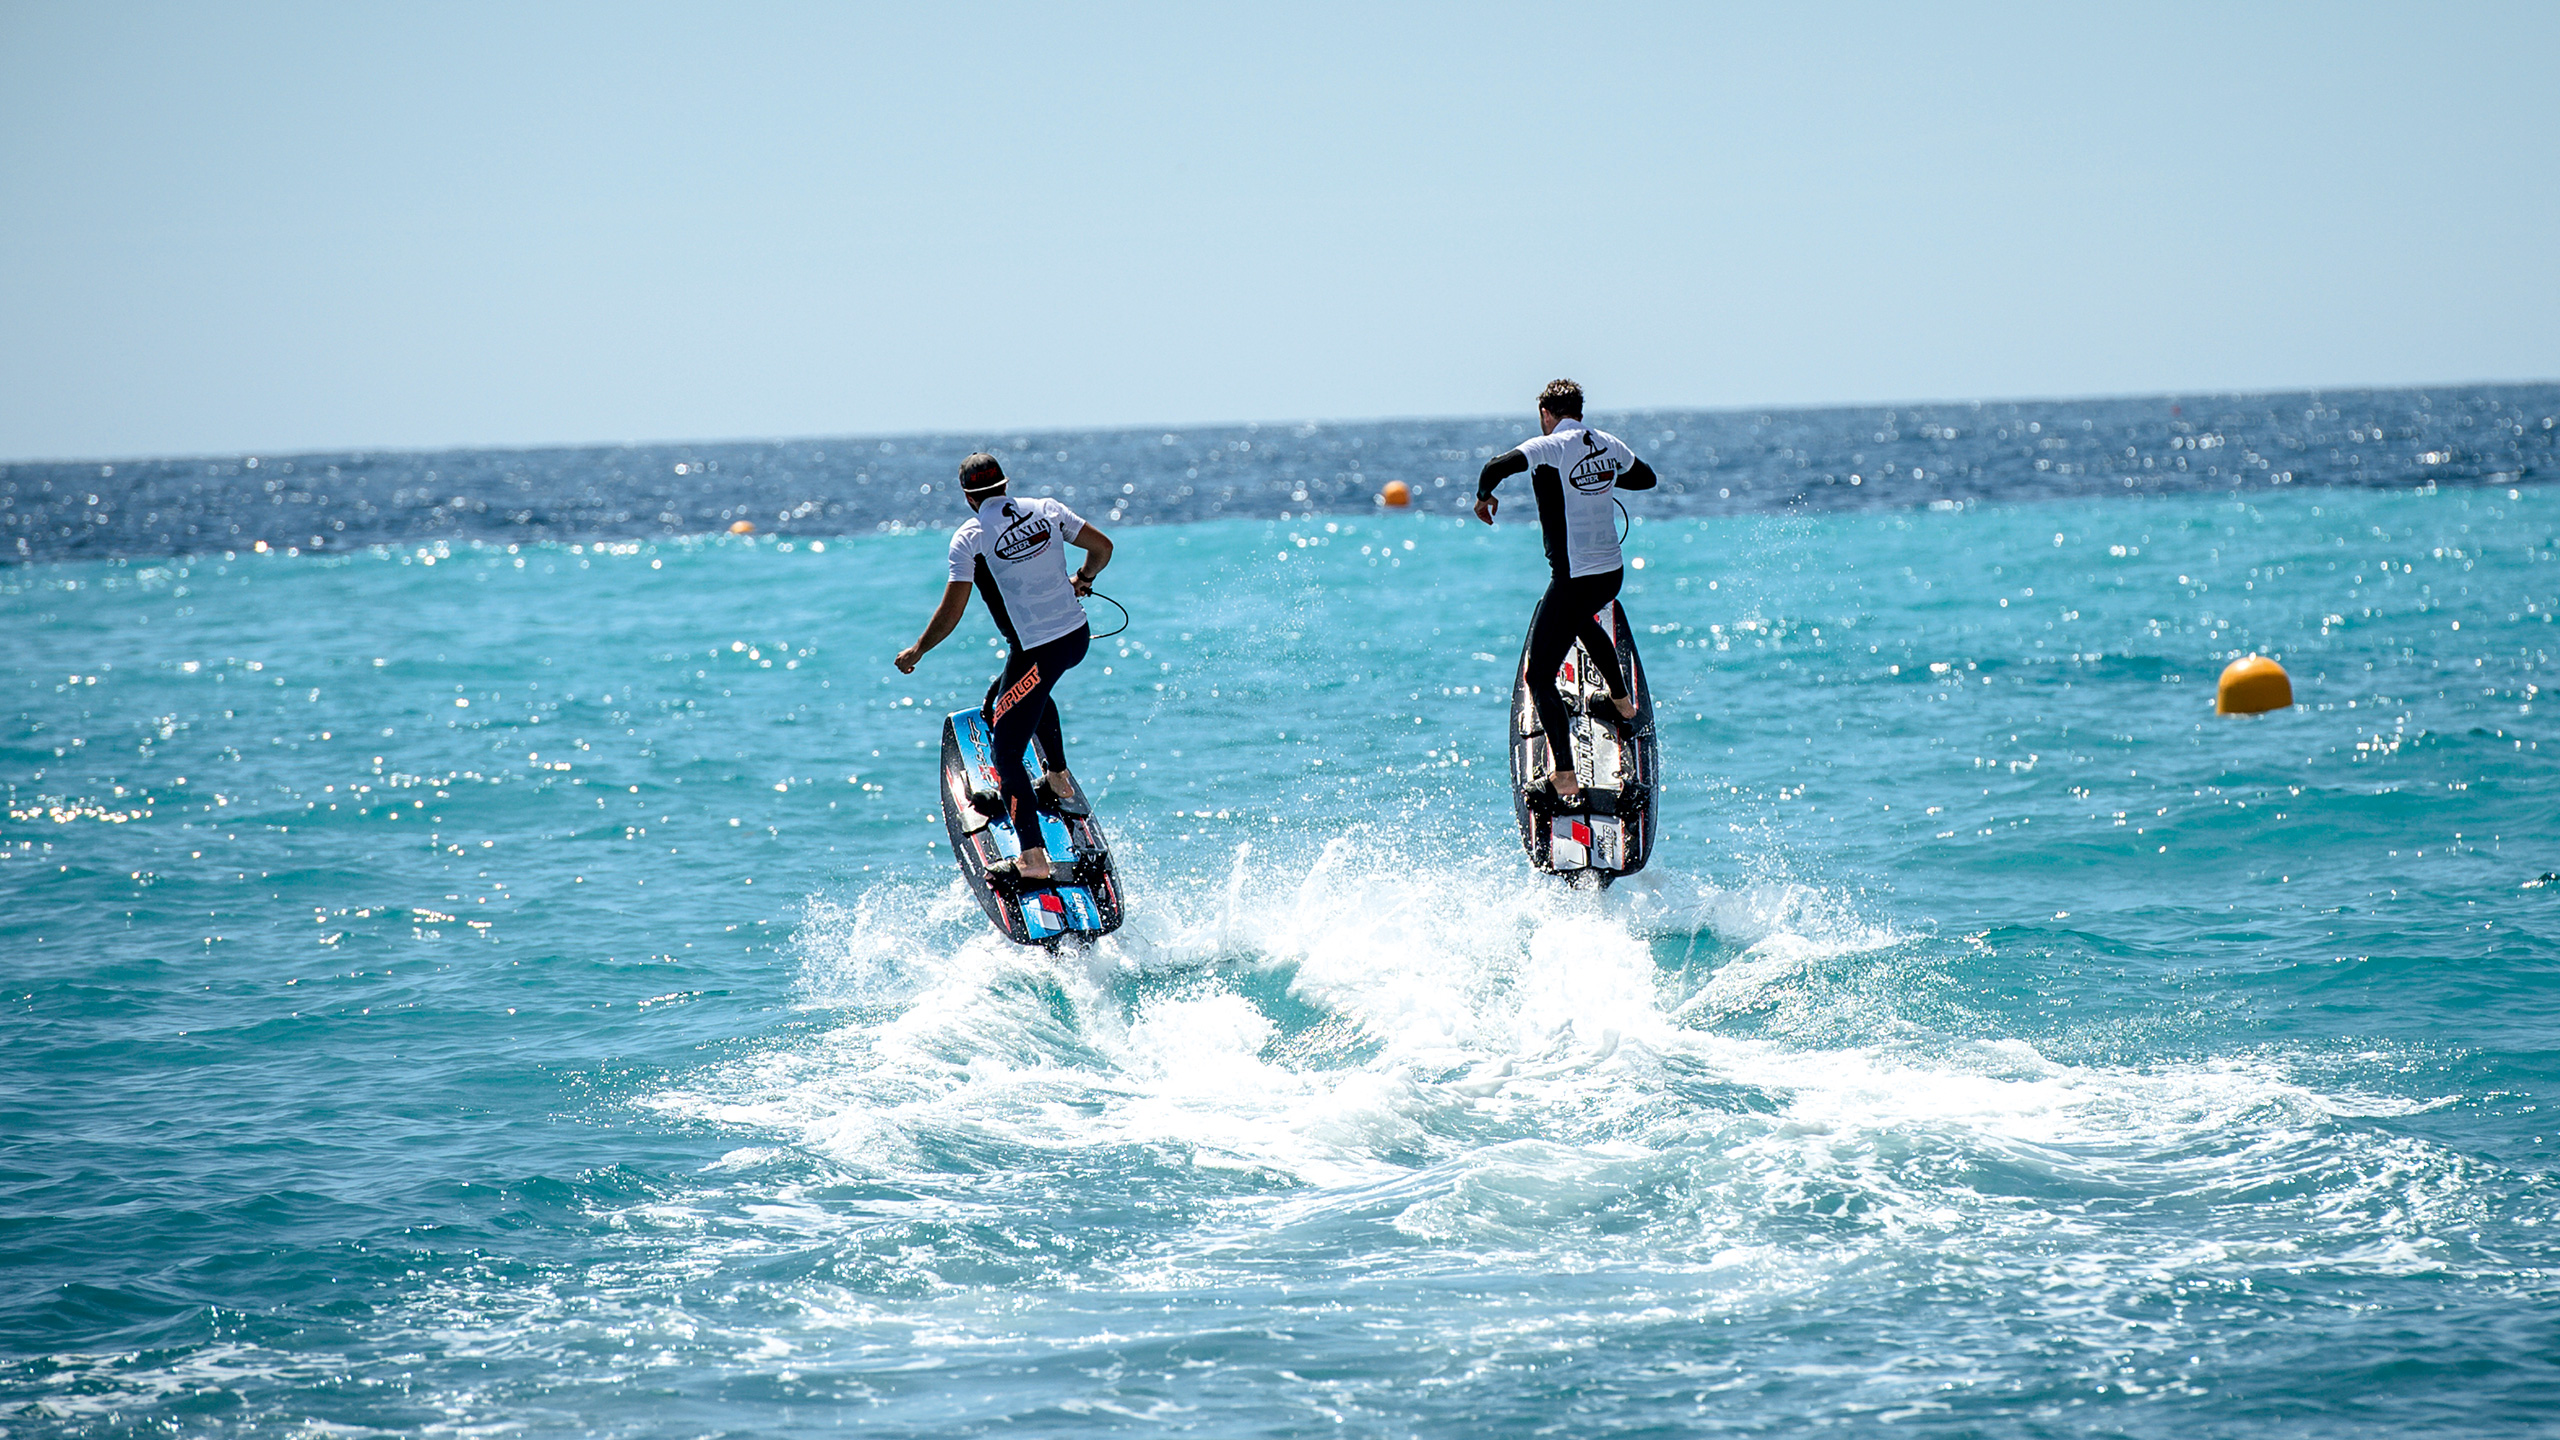 Sale, rental of exclusive and innovative water sports equipment ...